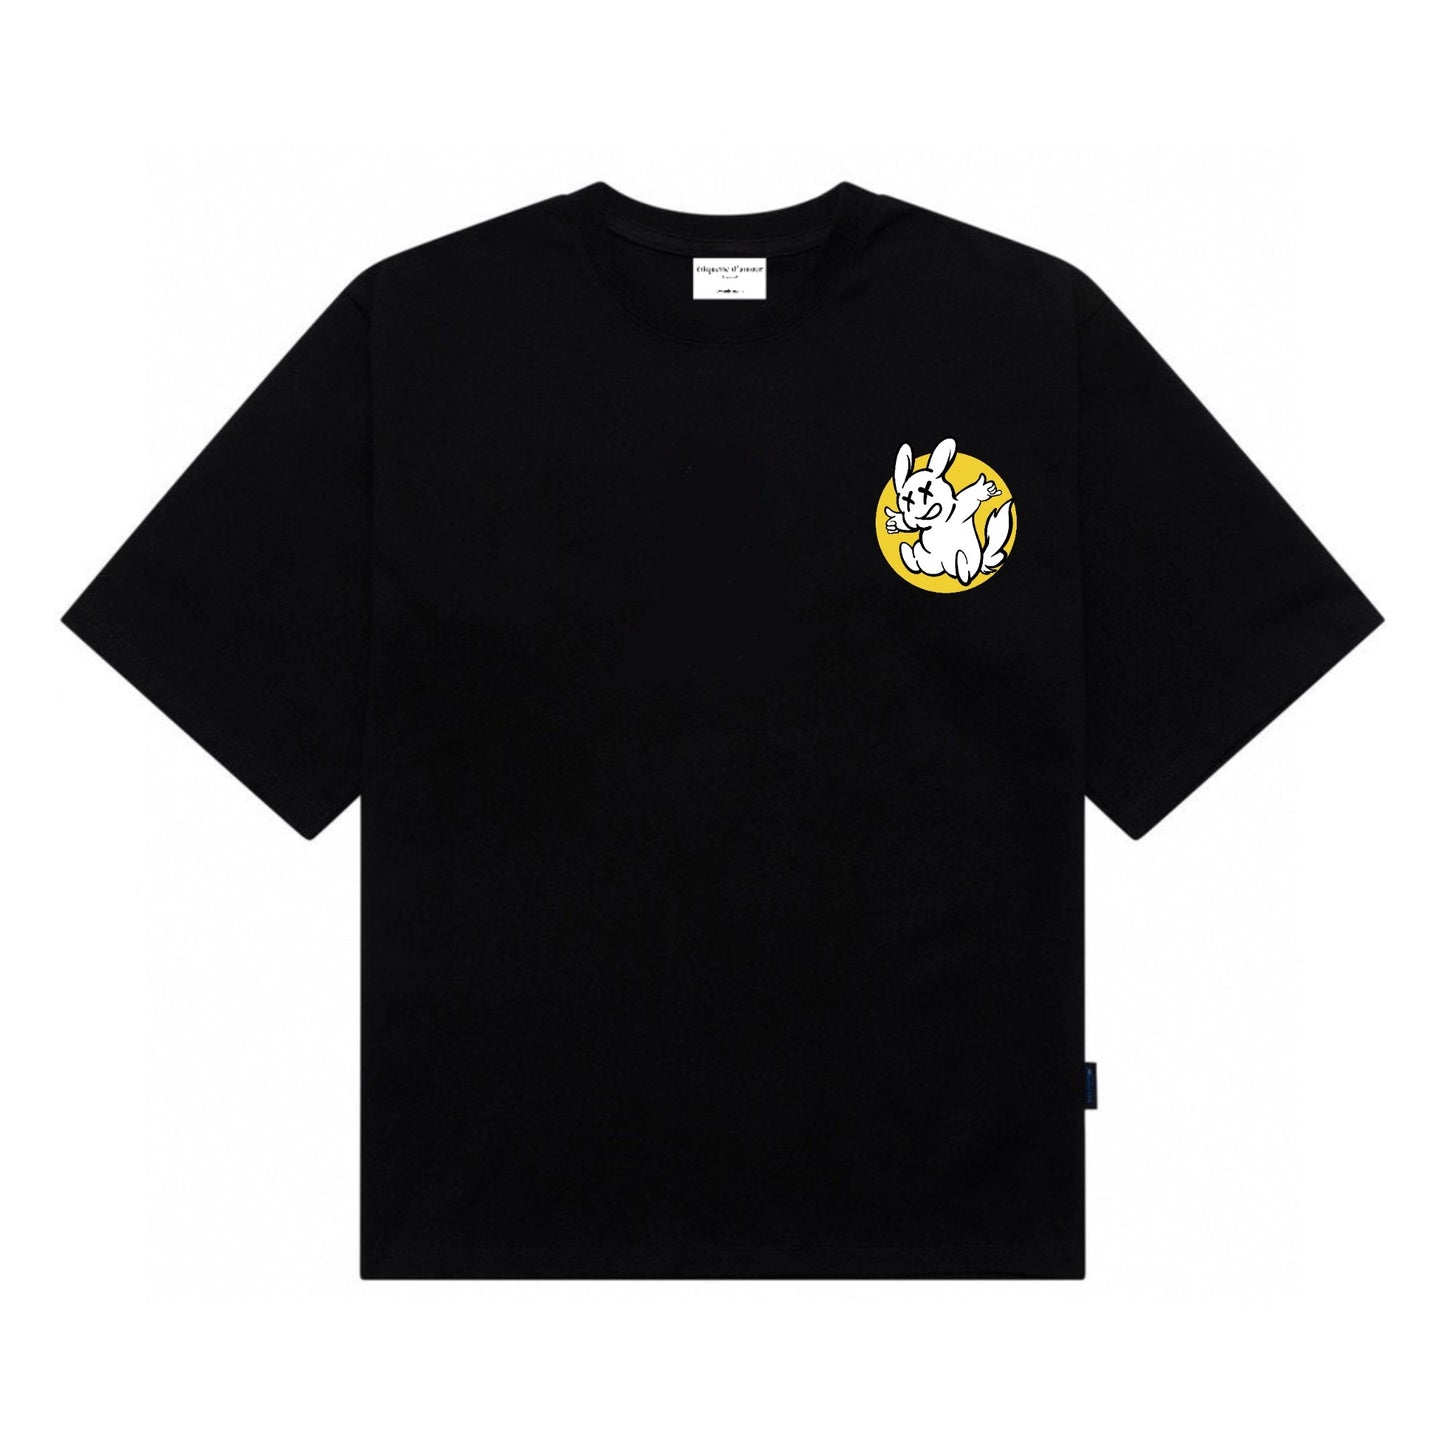 Etiquette Oversized T-Shirt - [0063] Fxxking Rabbit Chill Out